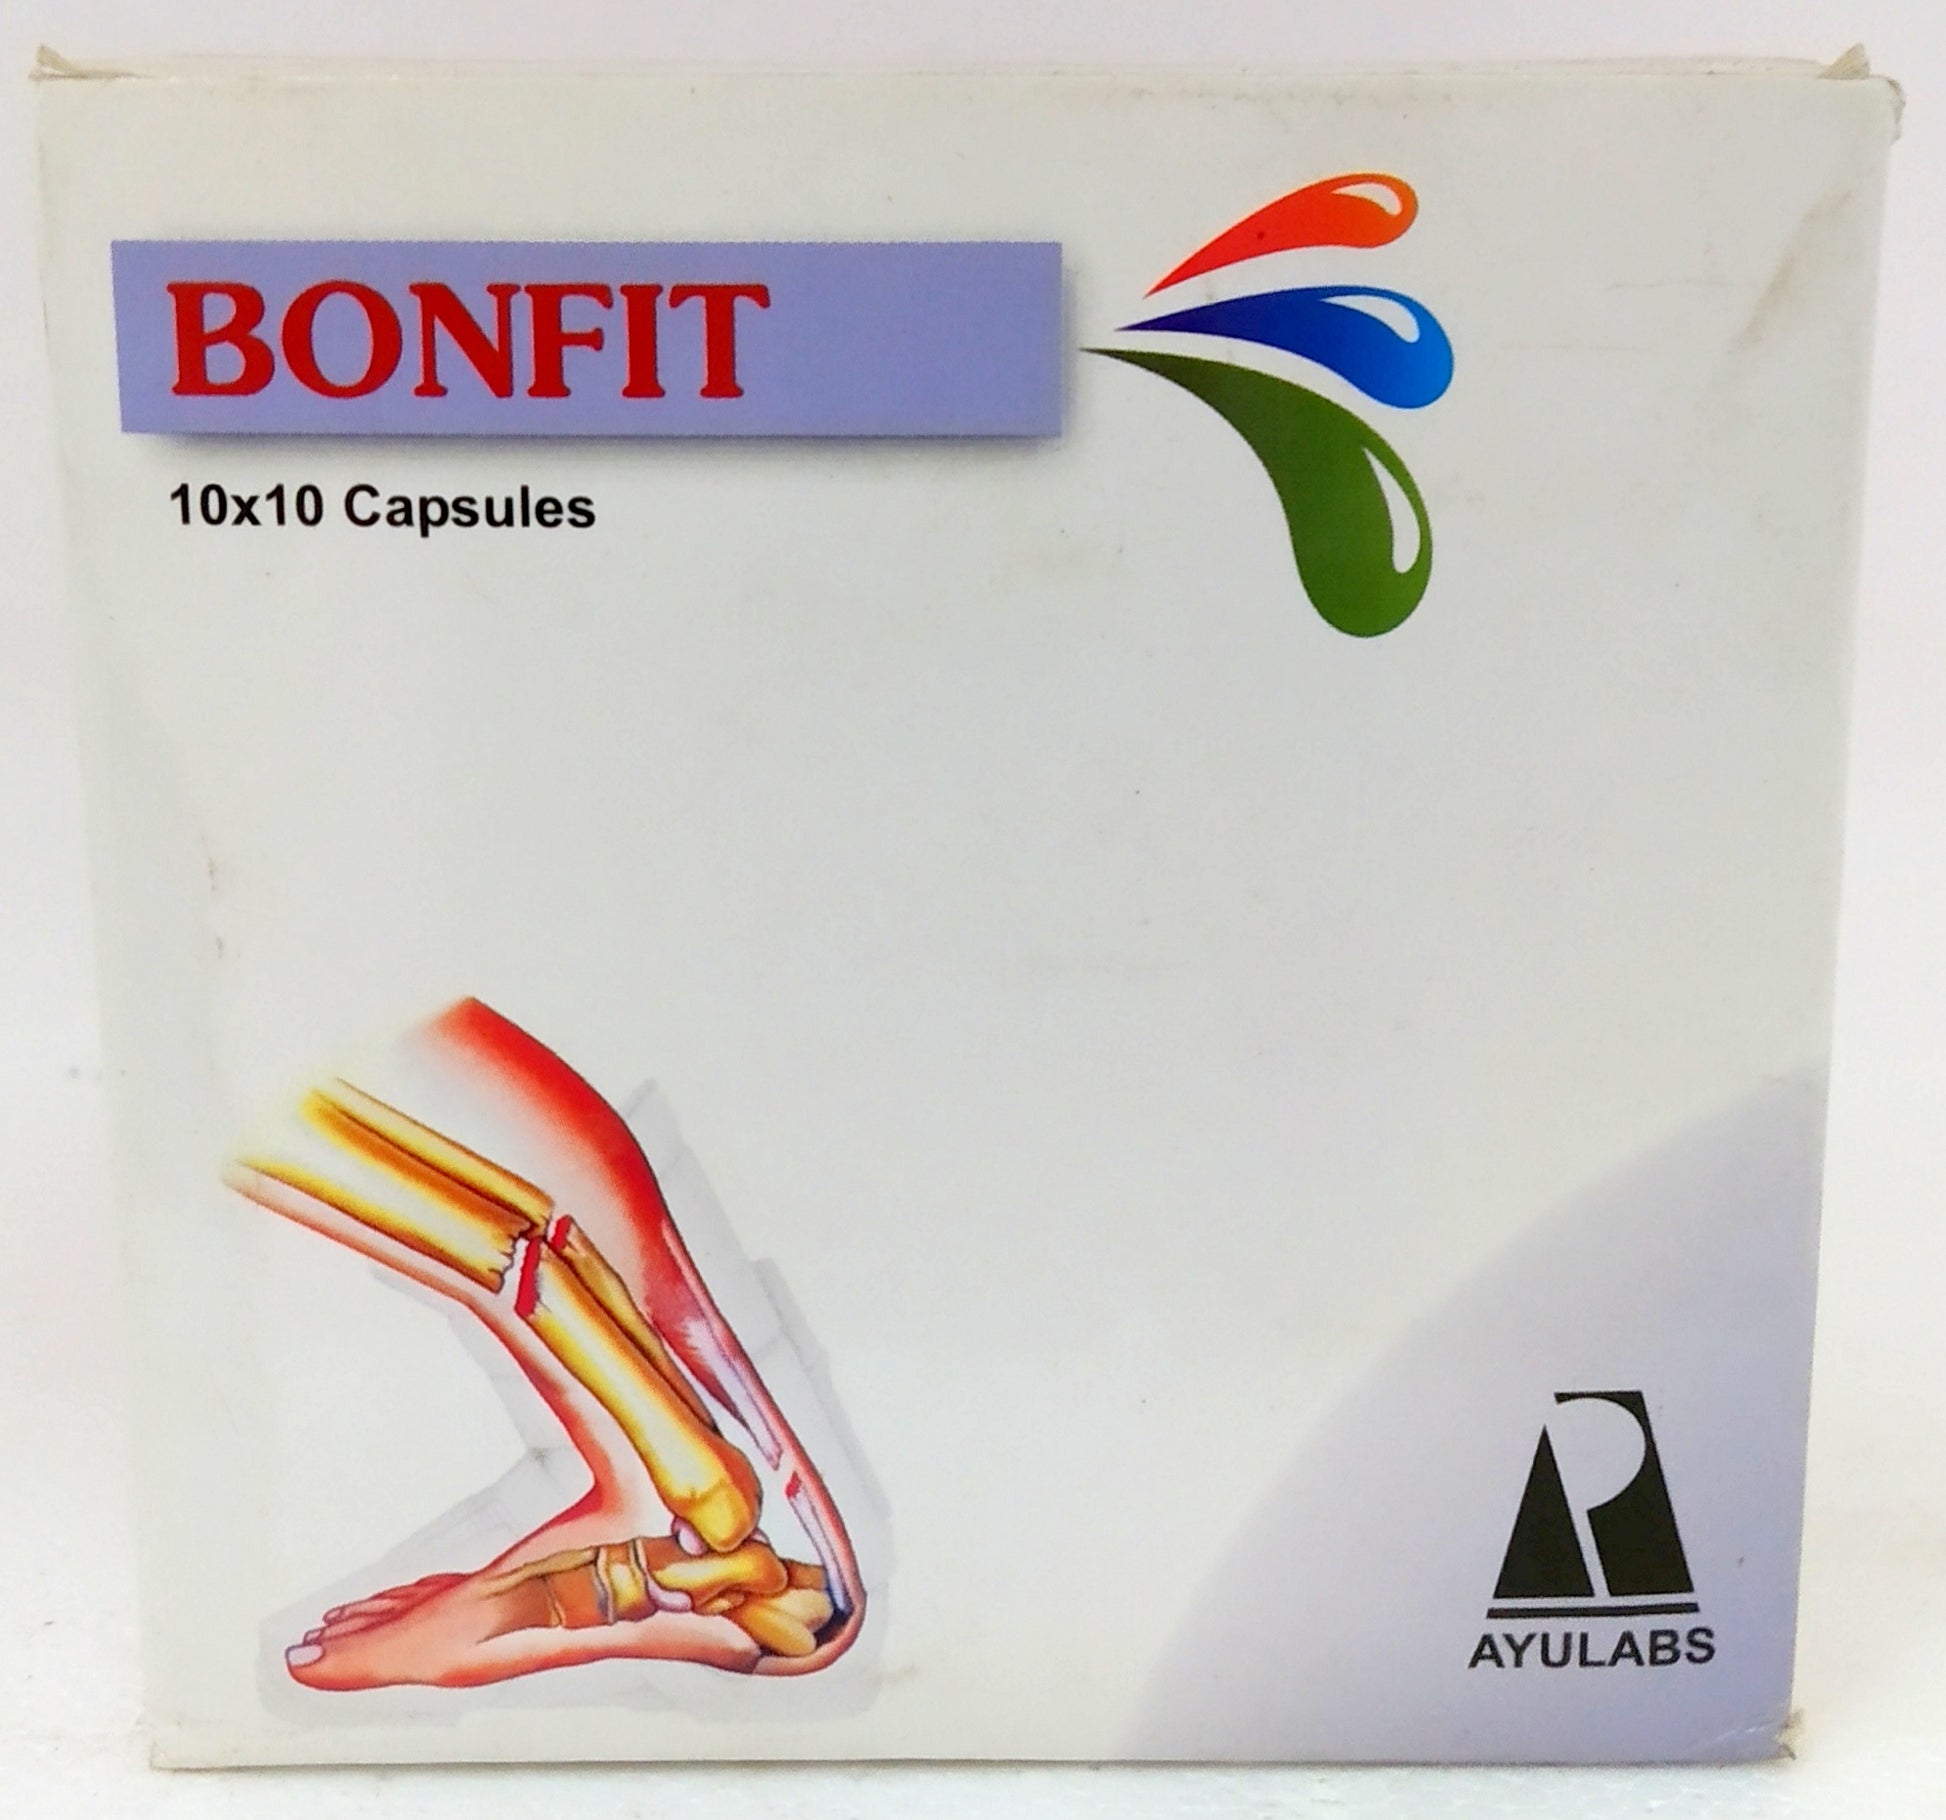 Shop Bonfit 10Capsules at price 45.00 from Ayulabs Online - Ayush Care